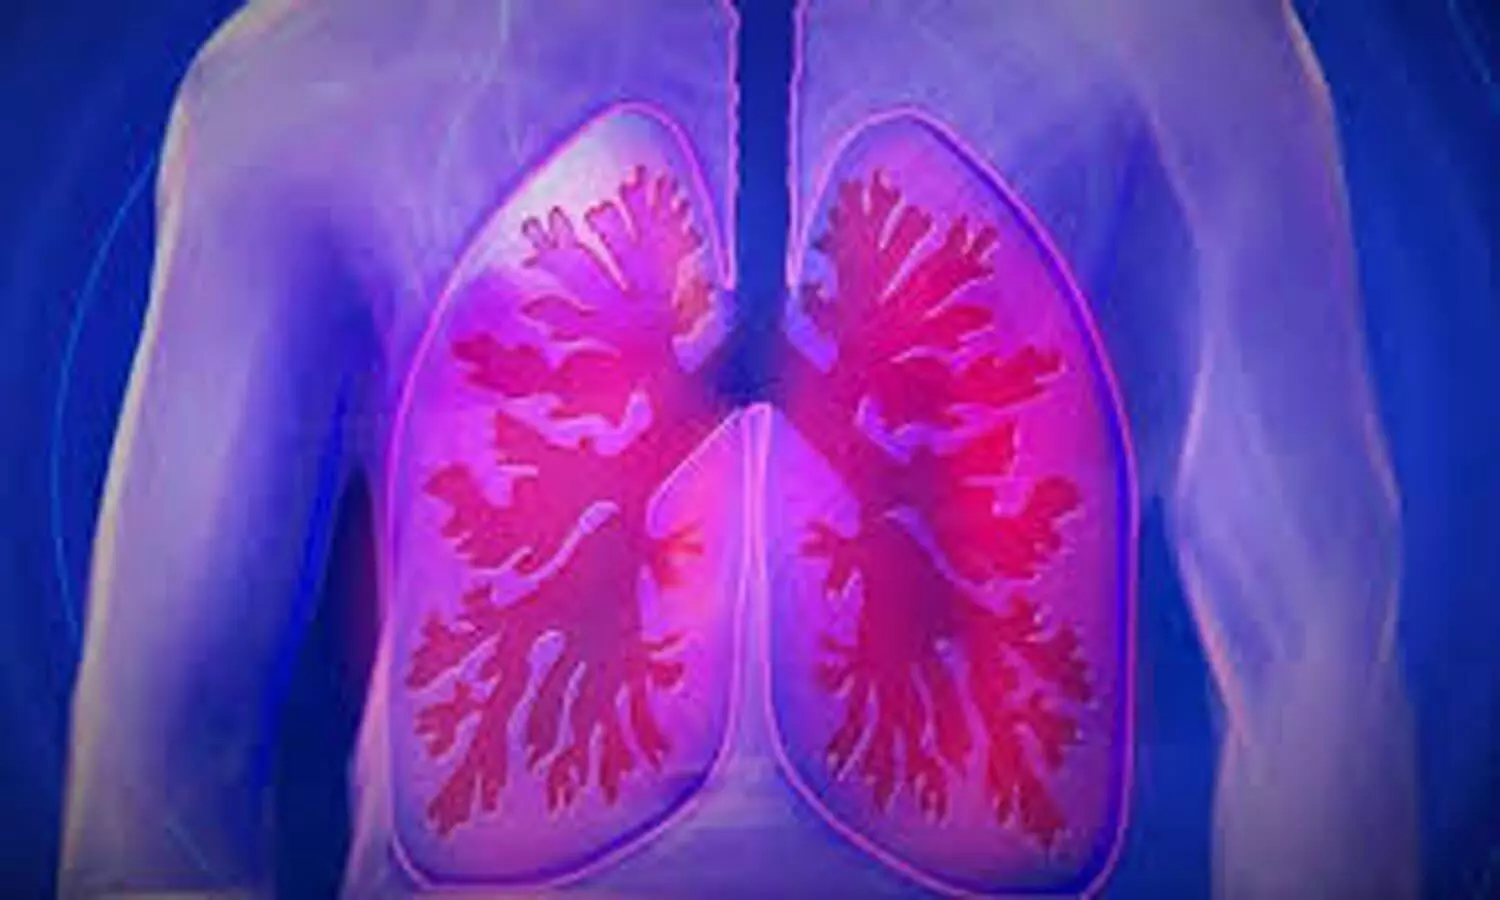 Nitrate supplementation may help breathing and lung clearance in the elderly